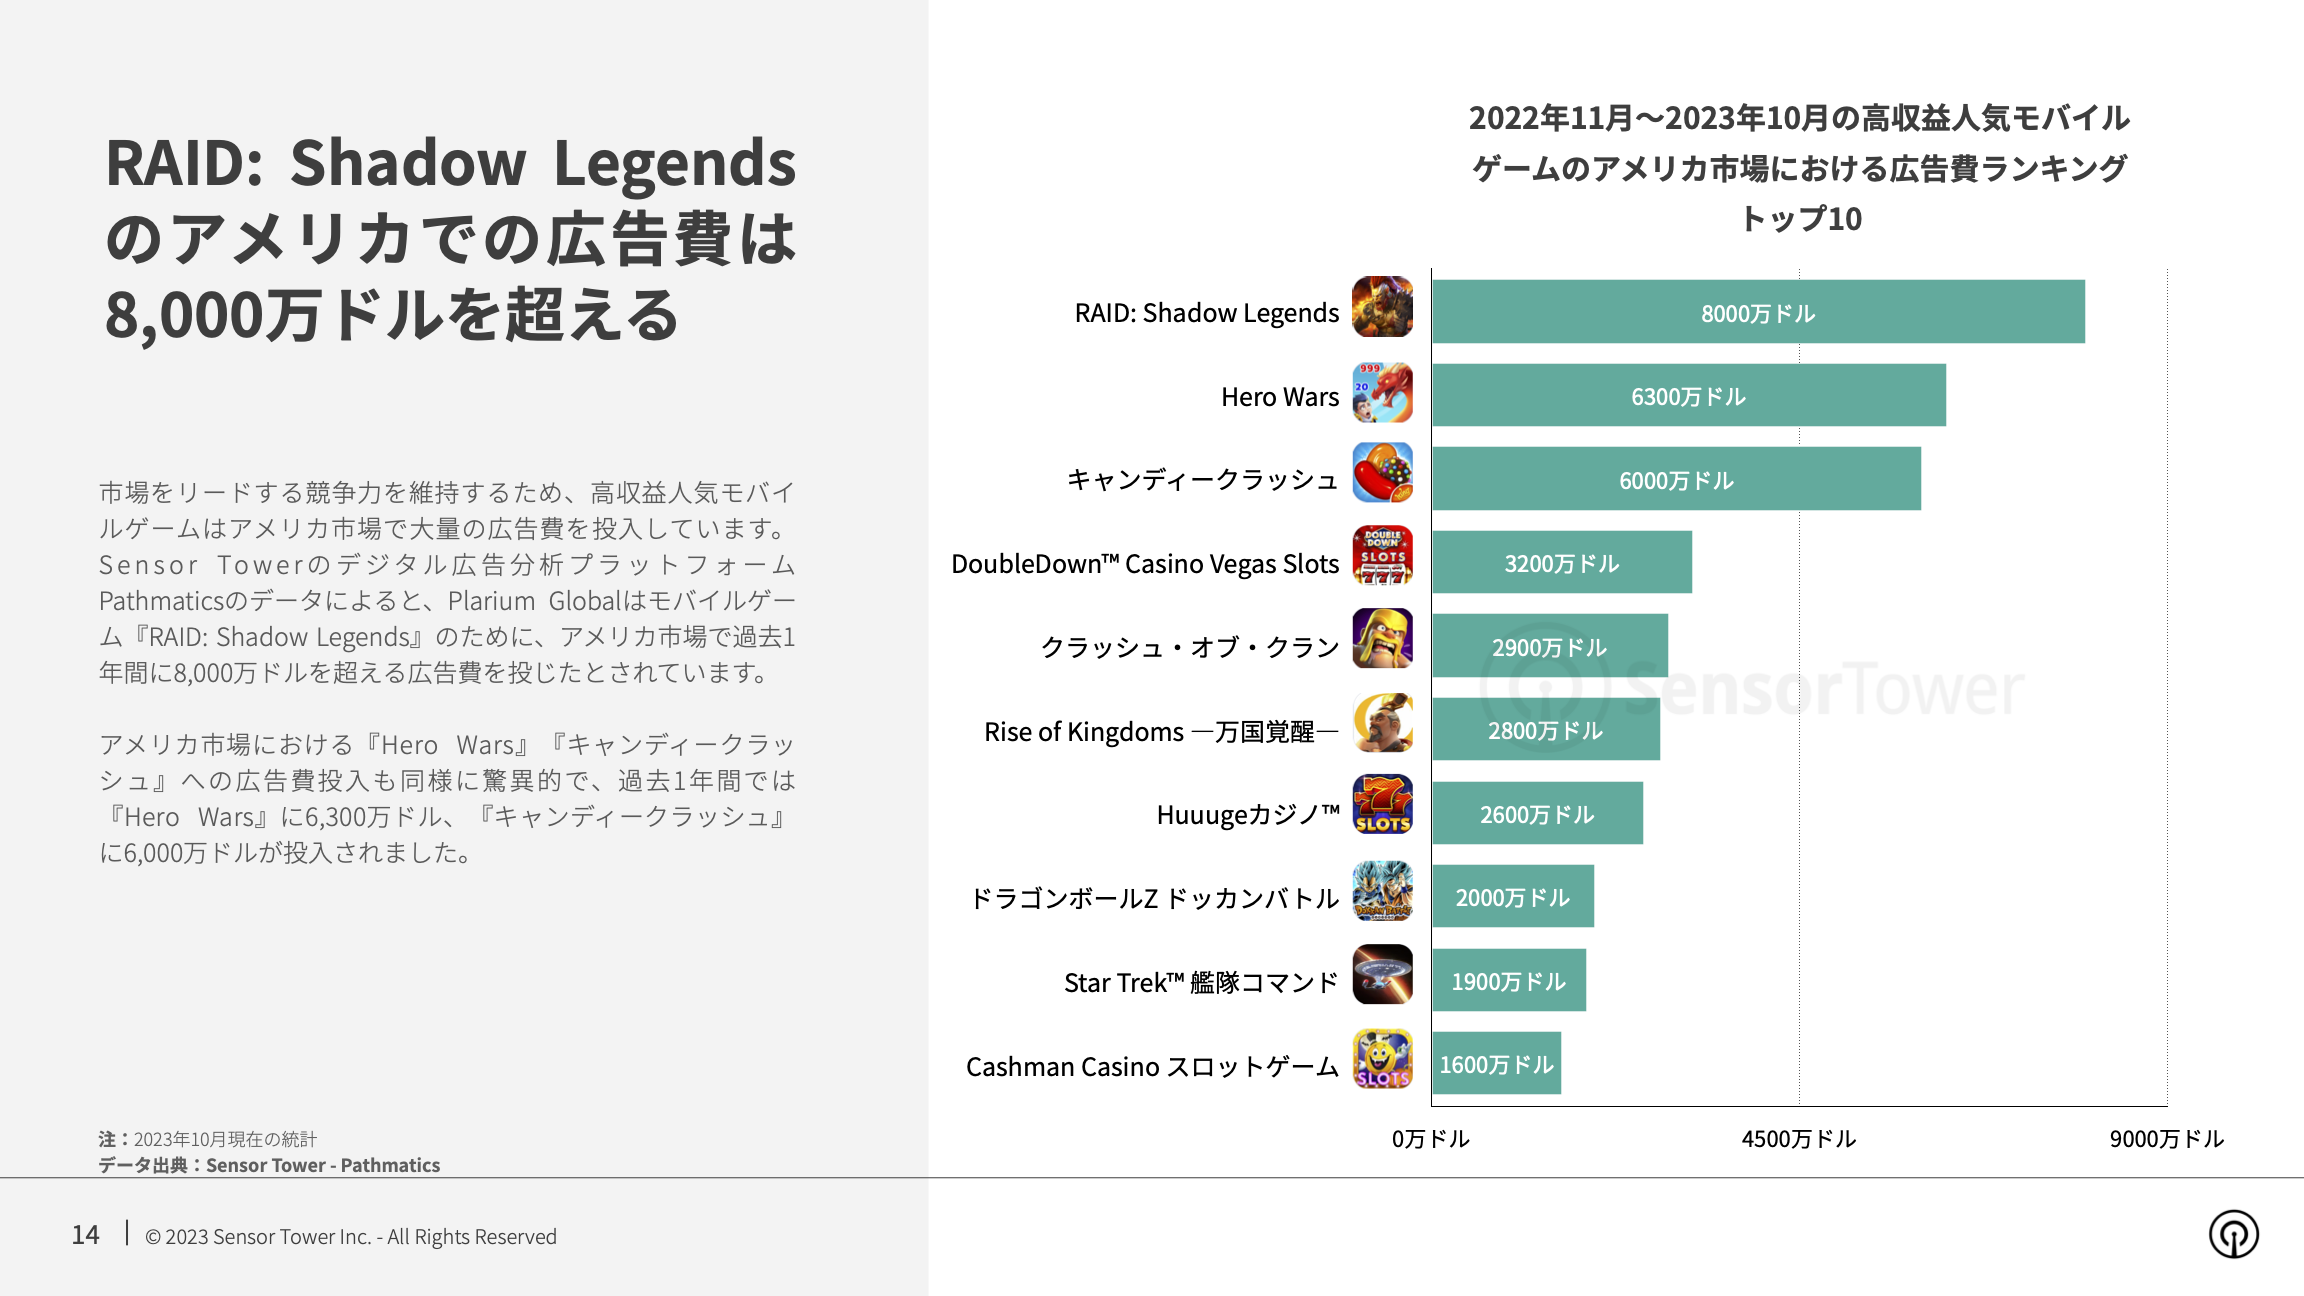 -JP- State of Mobile Games Popular for 5+ Years 2023 Report(pg14)